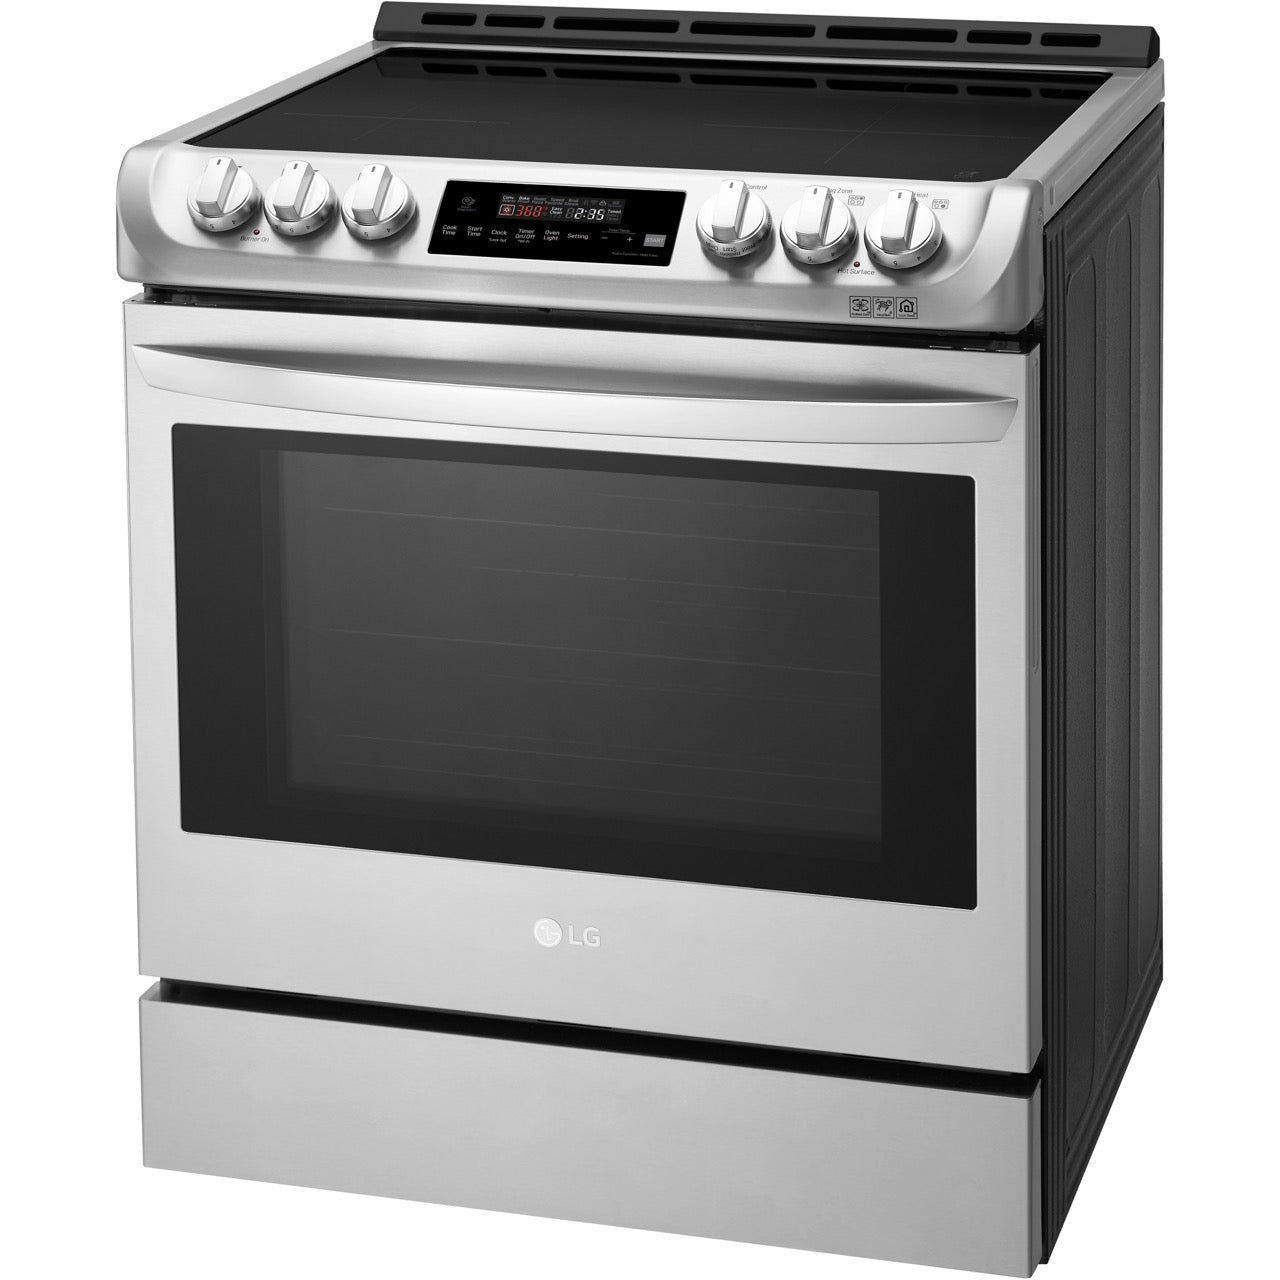 LG Electronics 6.3-Cu. Ft. Slide-In Electric Smart Range with ProBake Convection and Induction, Stainless Steel (LSE4616ST)